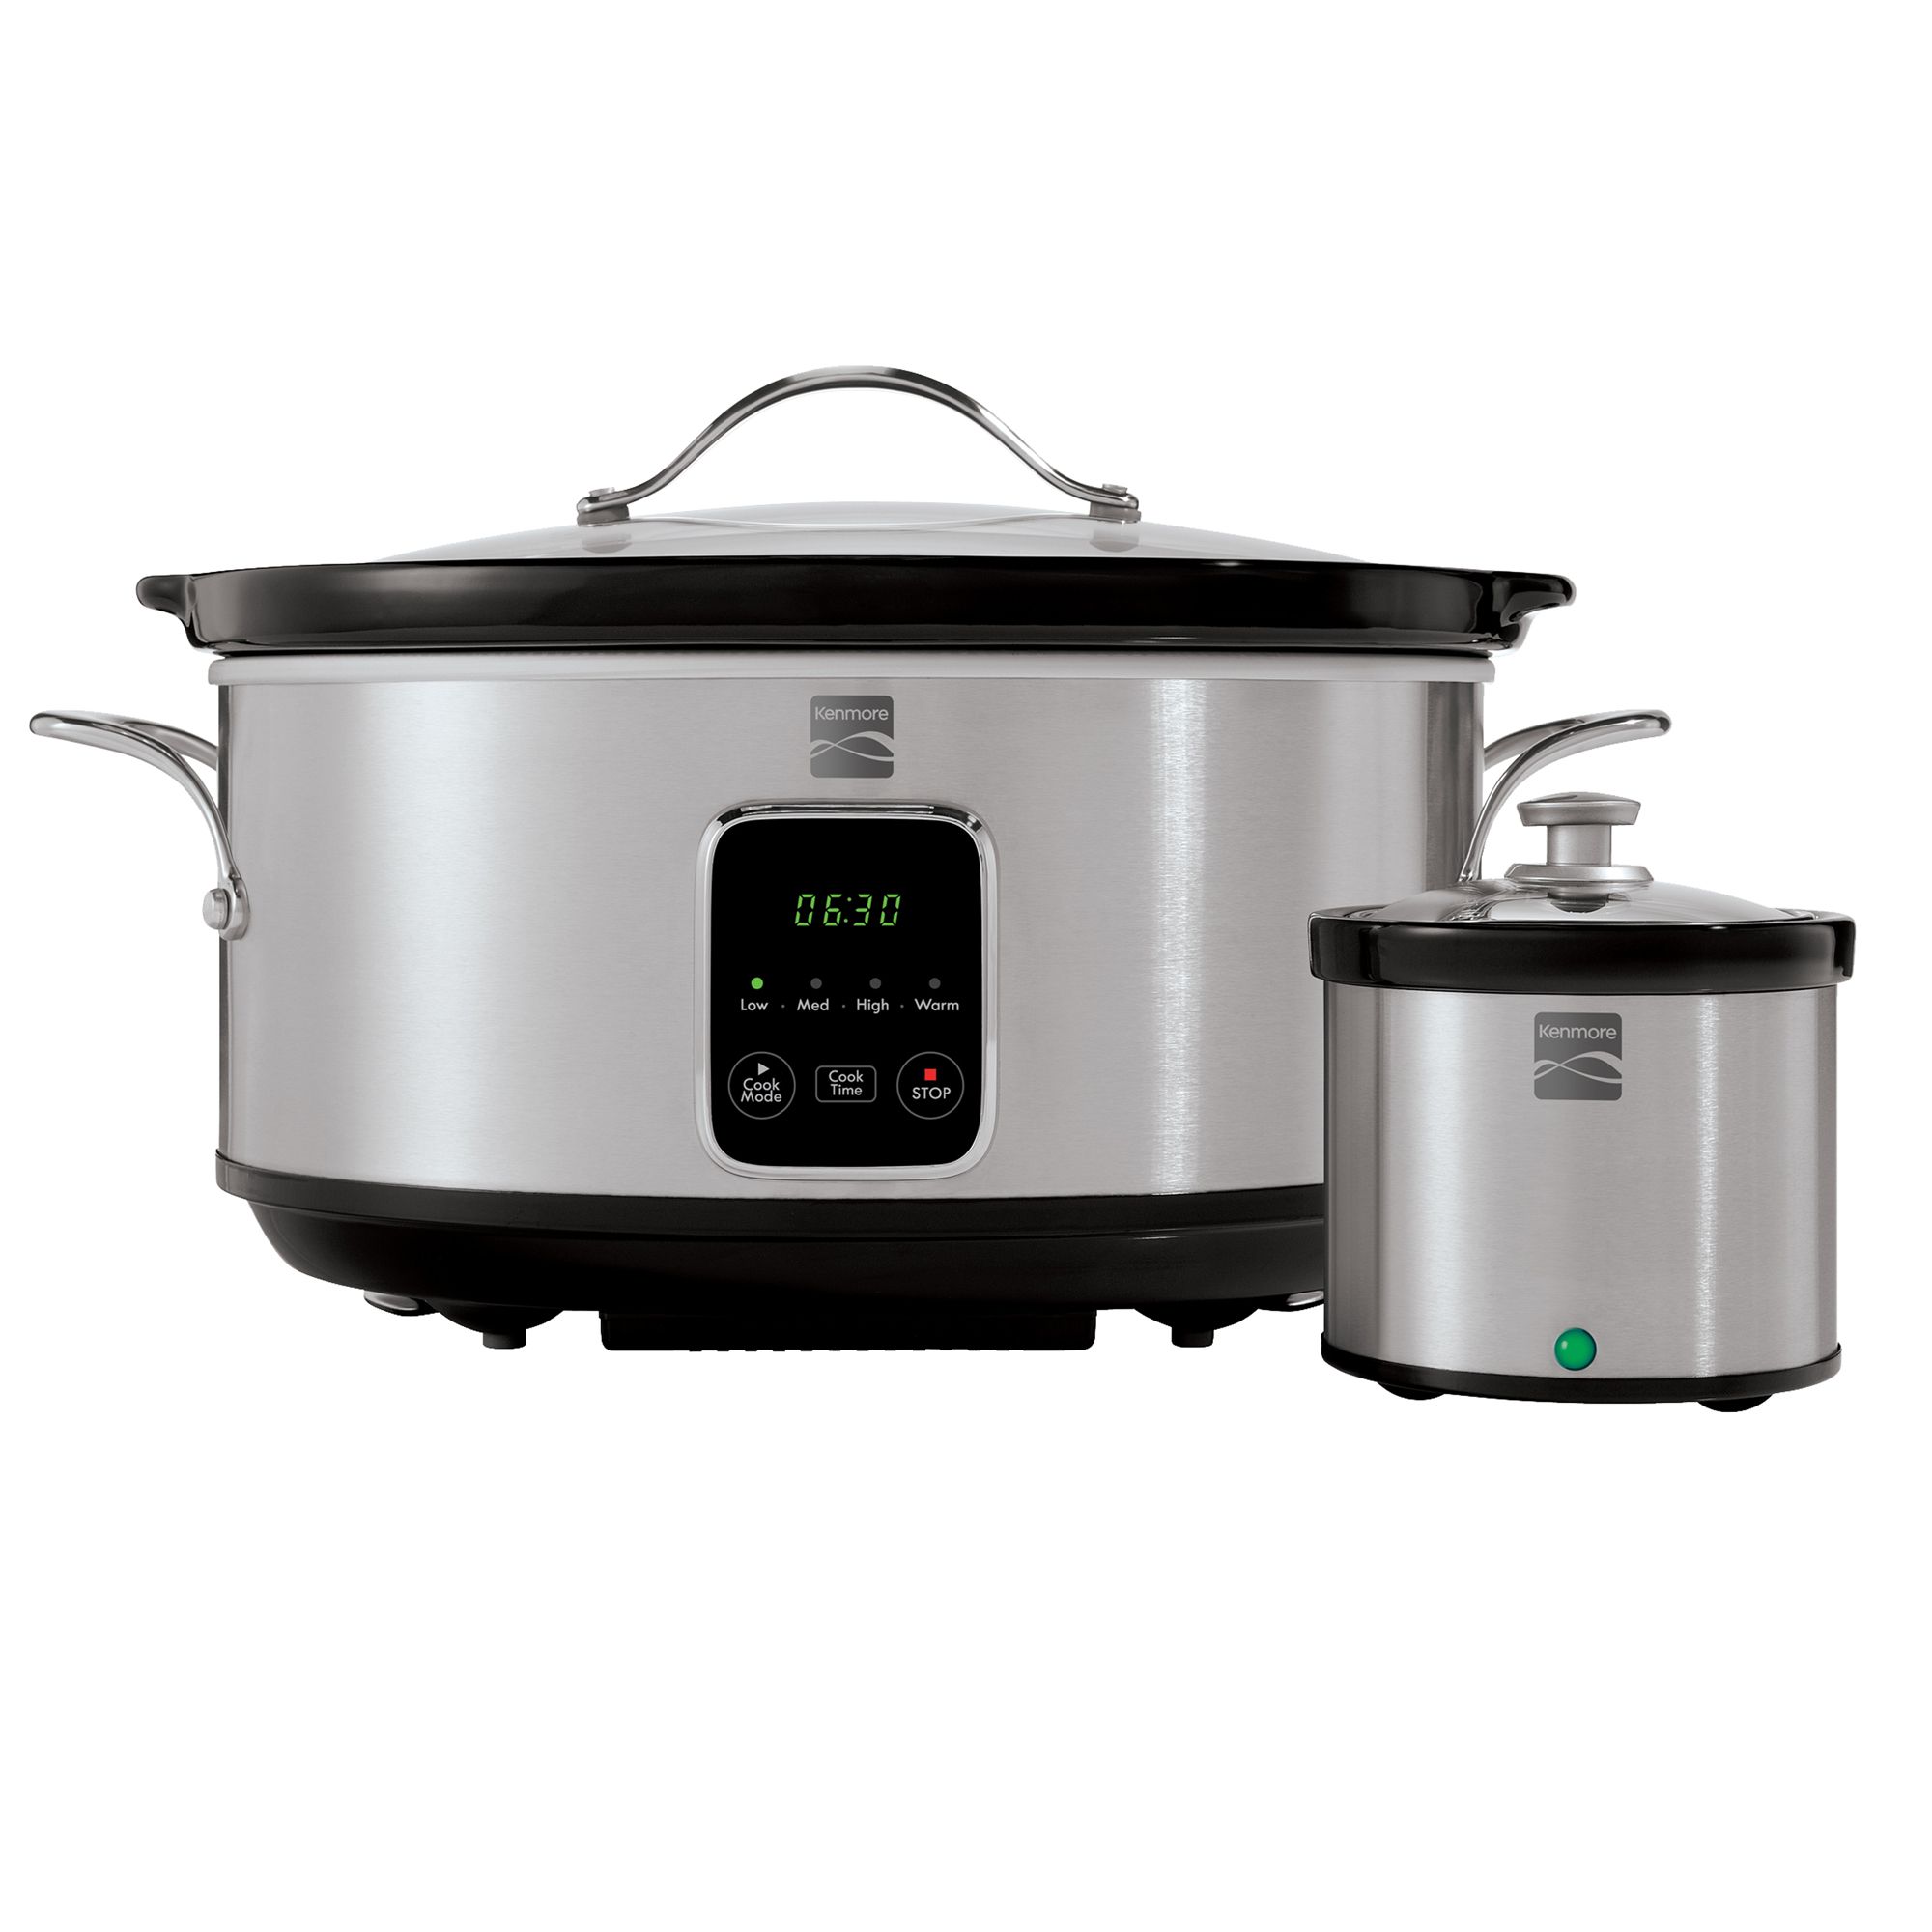 Kenmore 7-qt Slow cooker With Mini Slow Cooker Only $29.99!